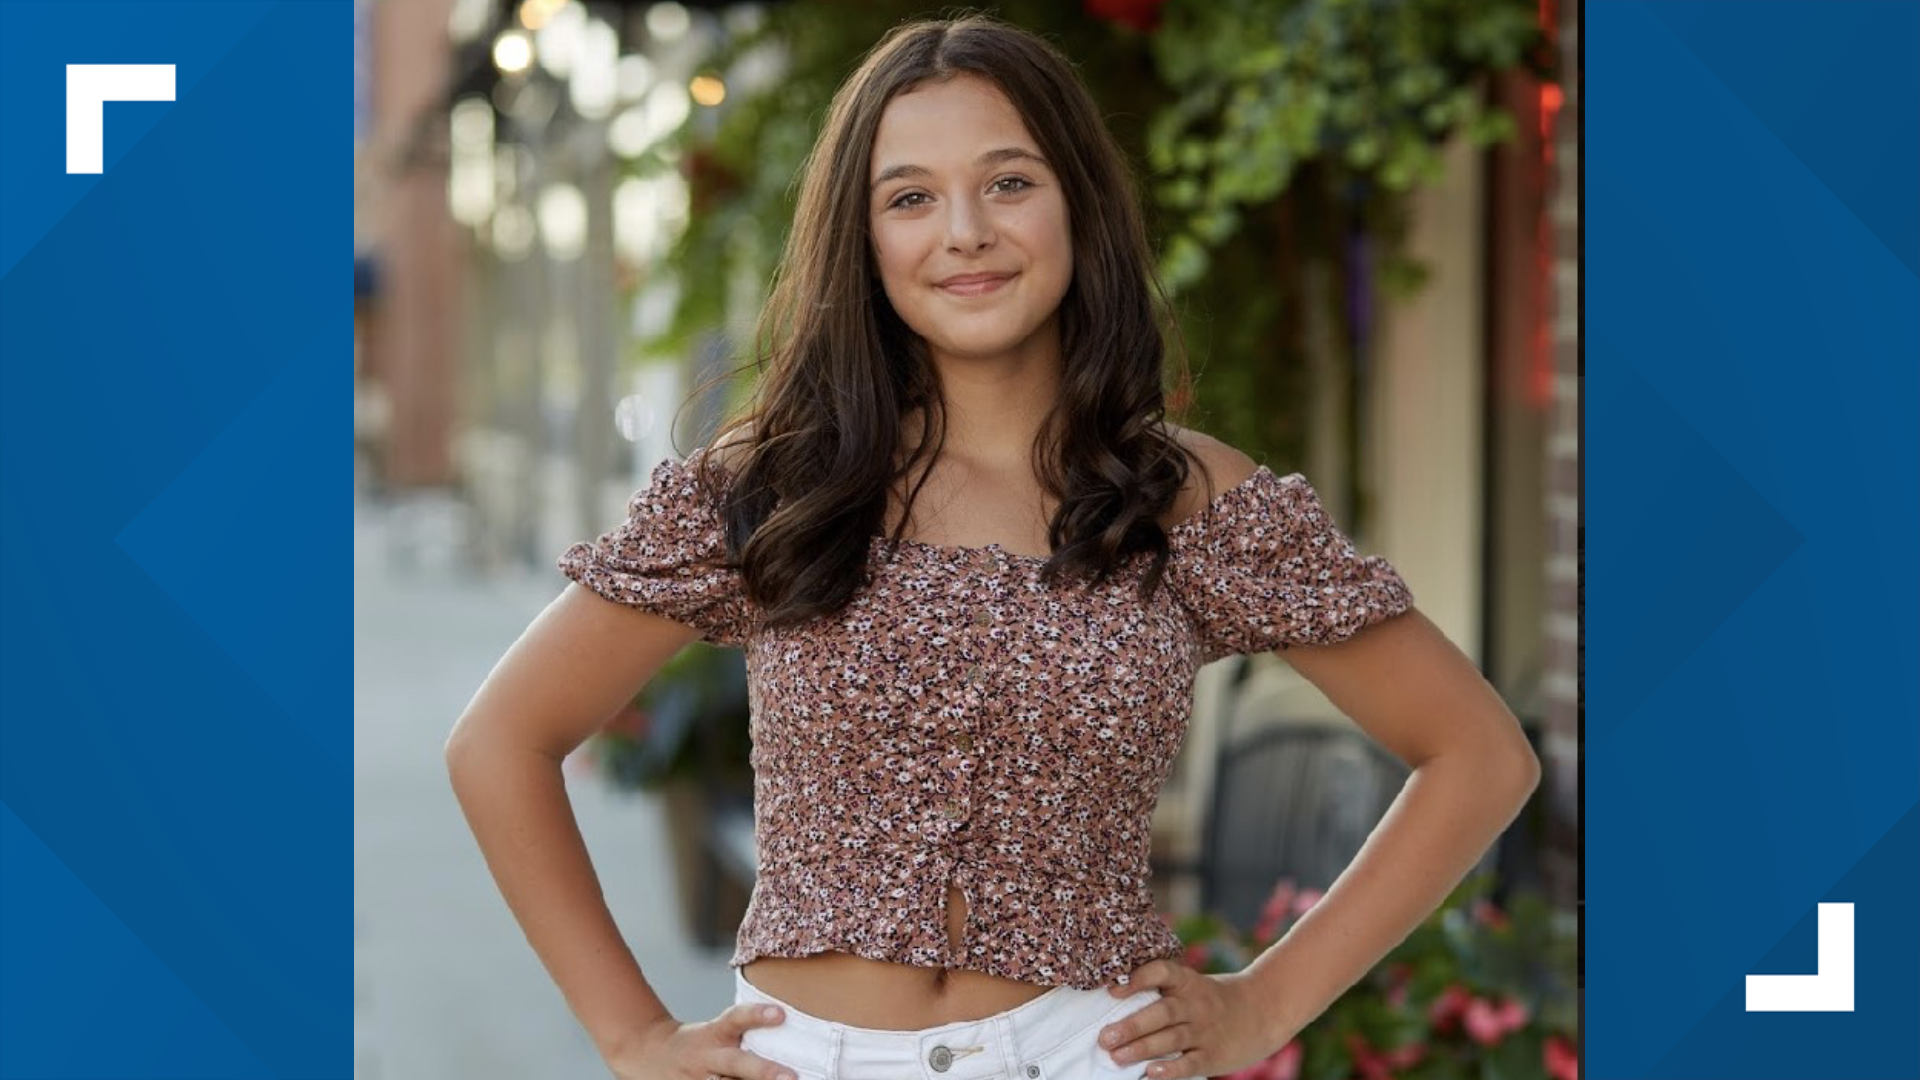 13-year-old Reagan Lawson overcame her fear of singing in front of people to win the 12-14 age group of "Military Kids Have Talent."